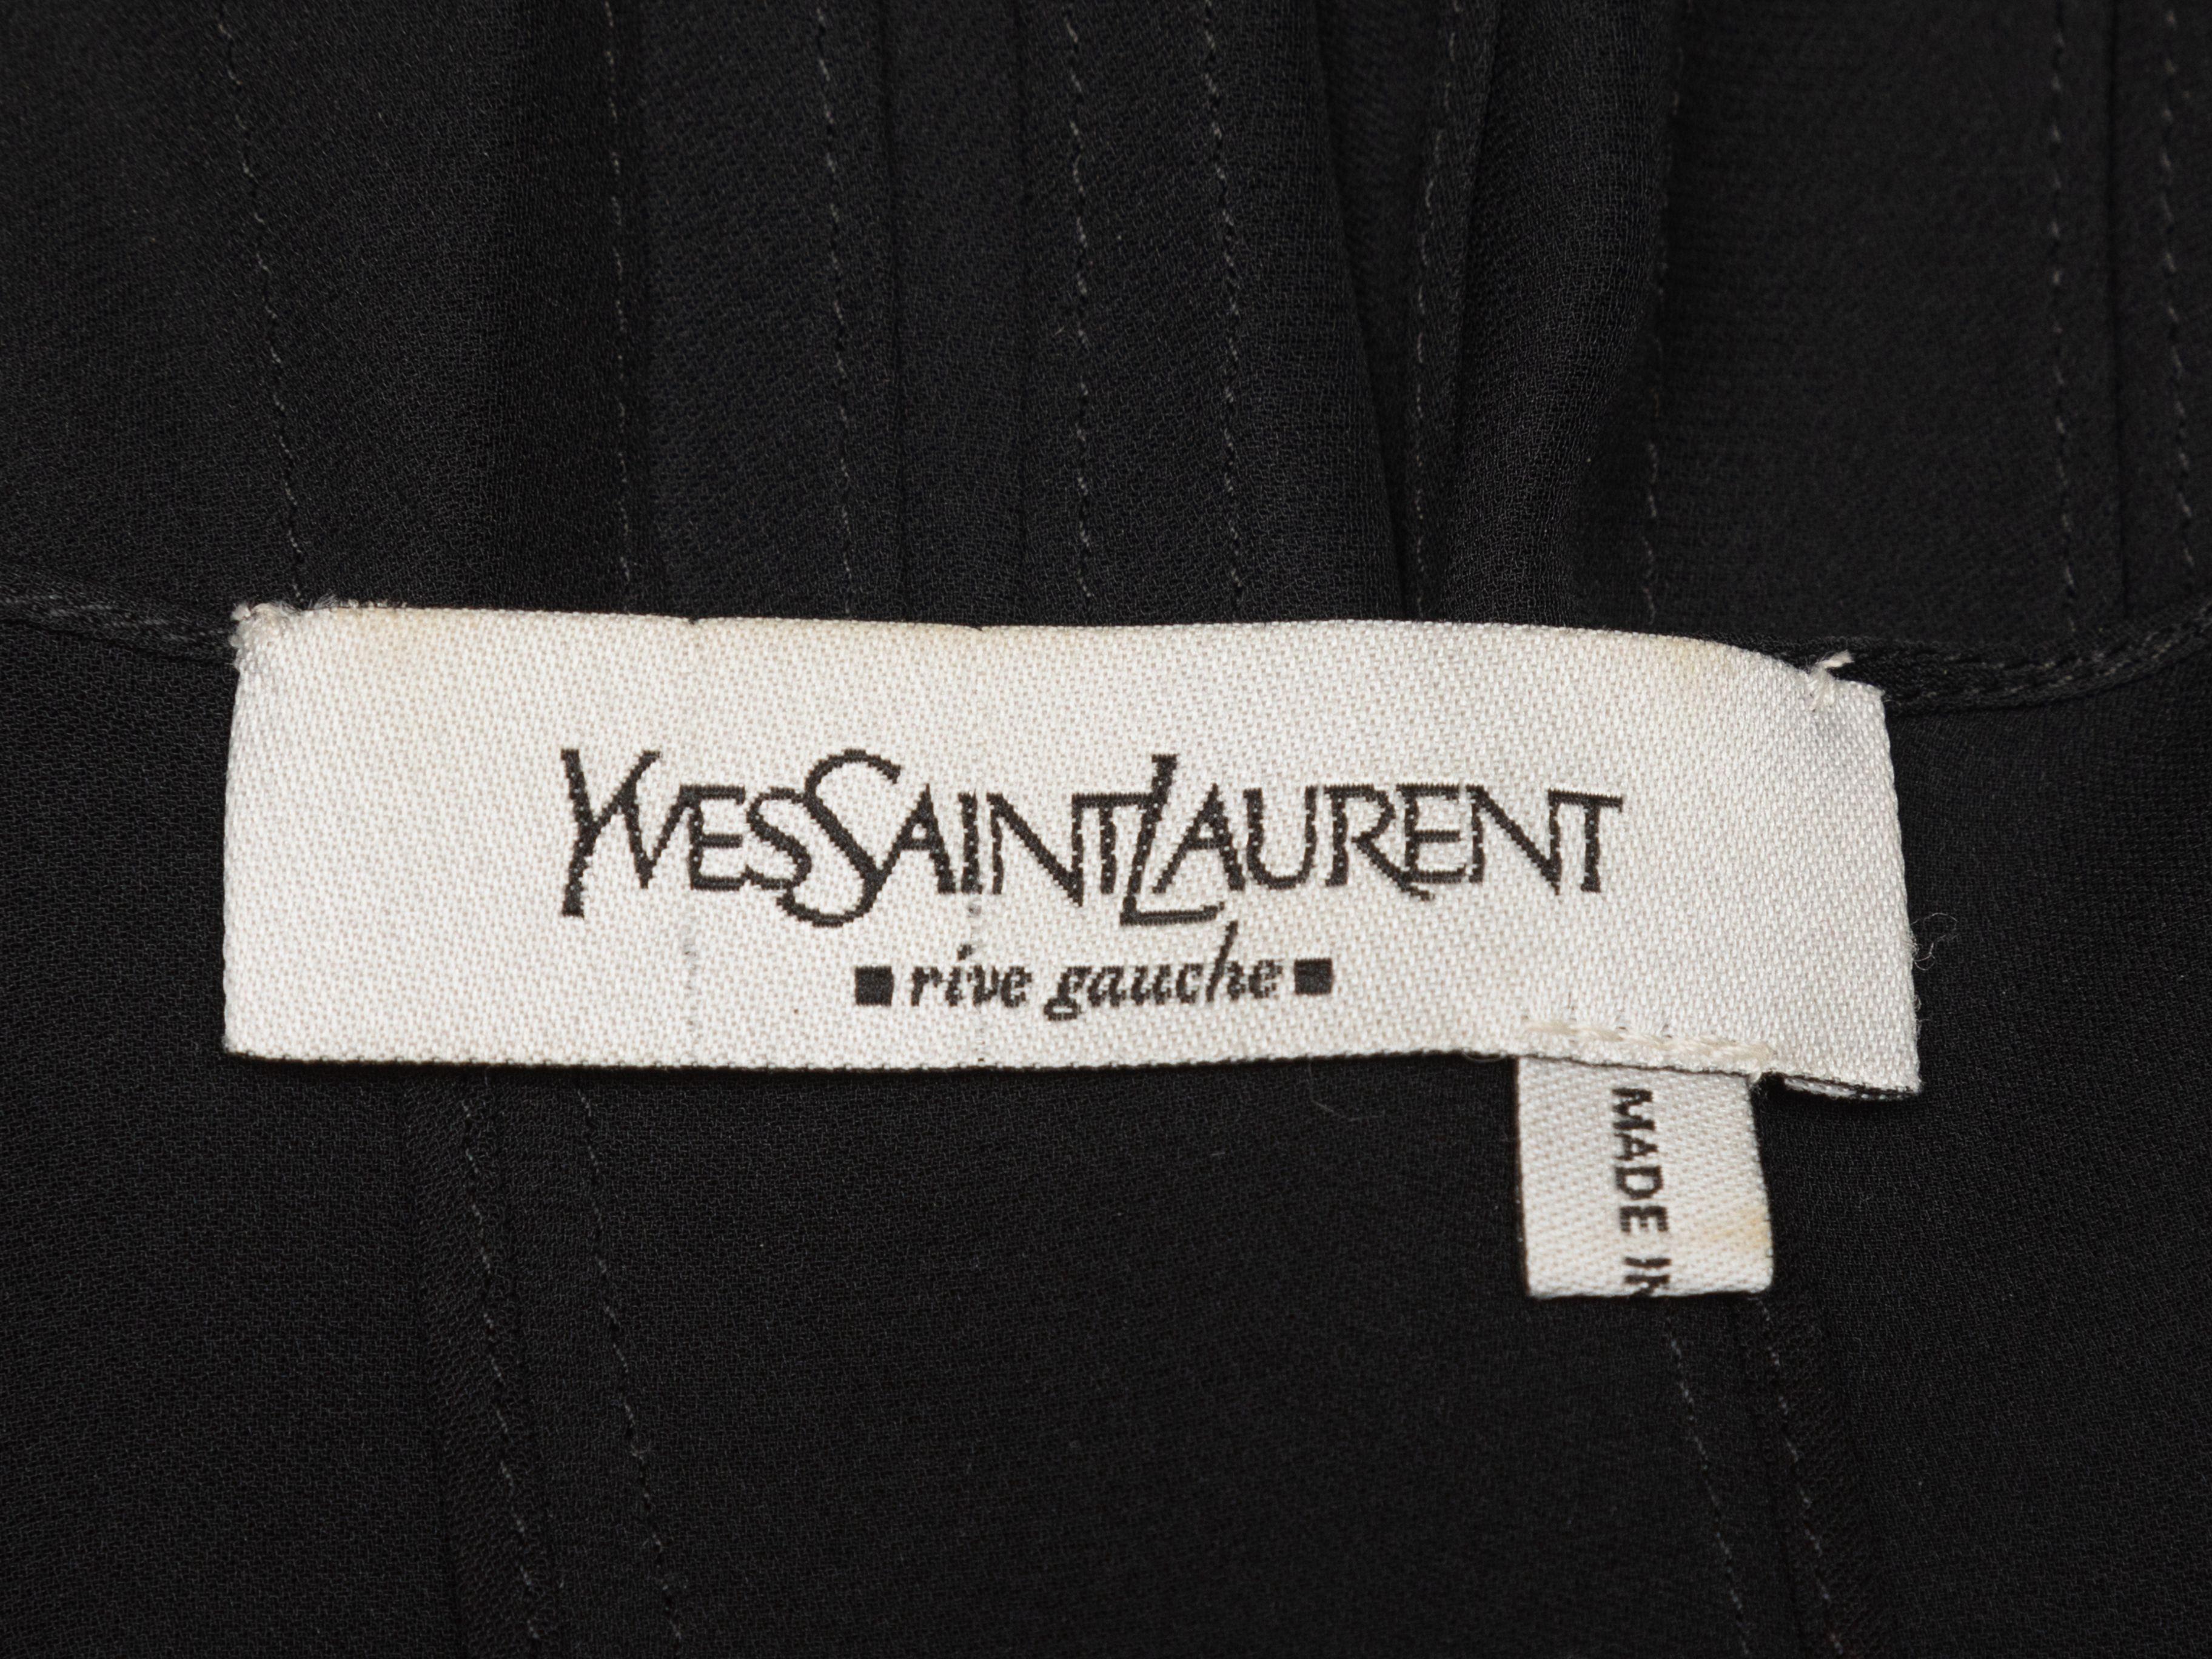 Product Details: Black sleeveless pleated silk top by Yves Saint Laurent. Square neckline. Button closures at center front. Designer size 36. 30